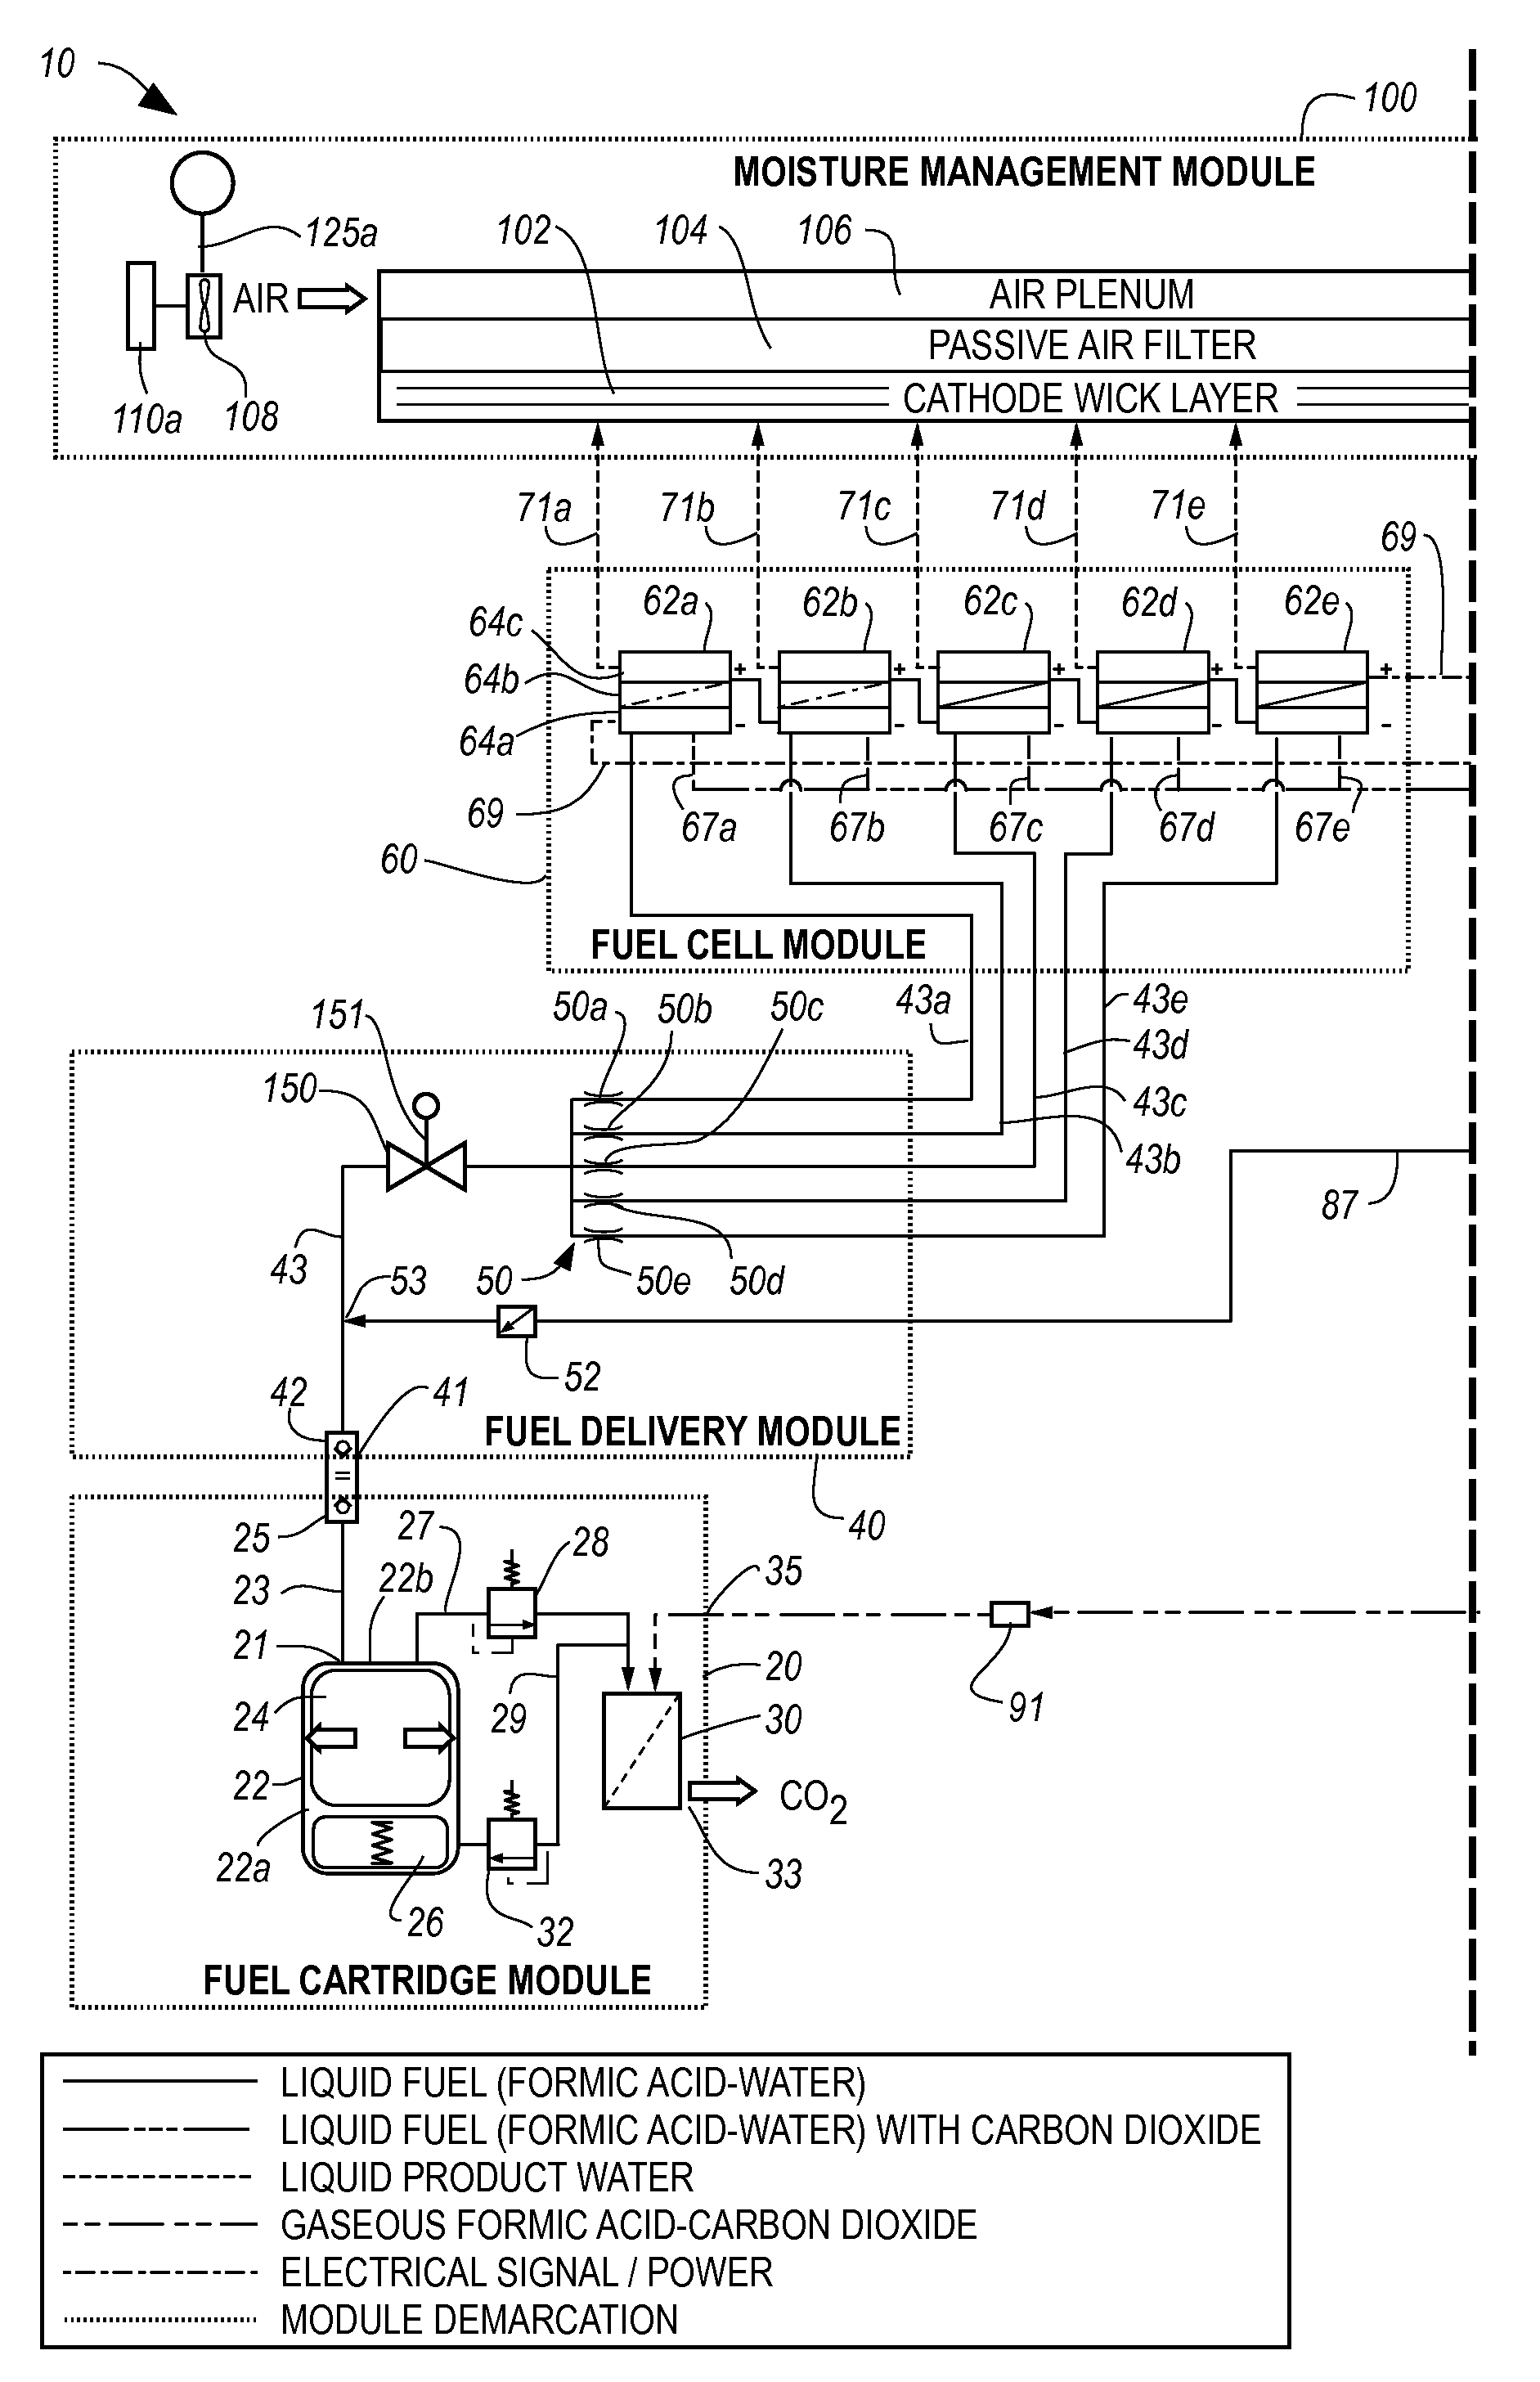 Passive-pumping liquid feed fuel cell system